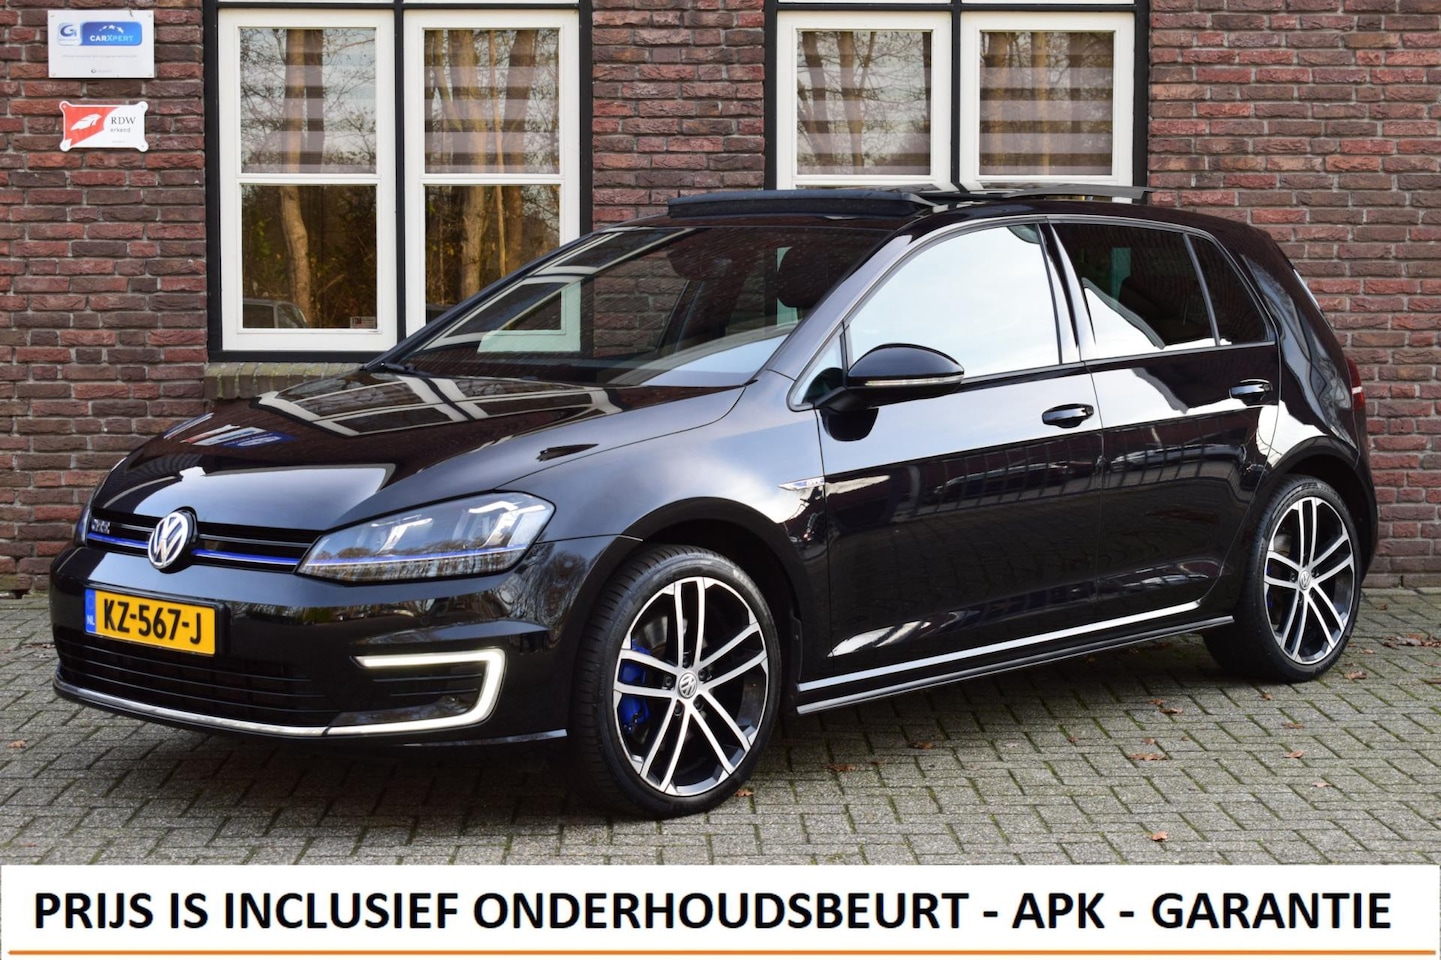 Volkswagen Golf 1.4 TSI GTE incl BTW is €21.657, - Connected Panoramadak | 18Inch | PDC 2X 2016 Hybride - Occasion te op AutoWereld.nl